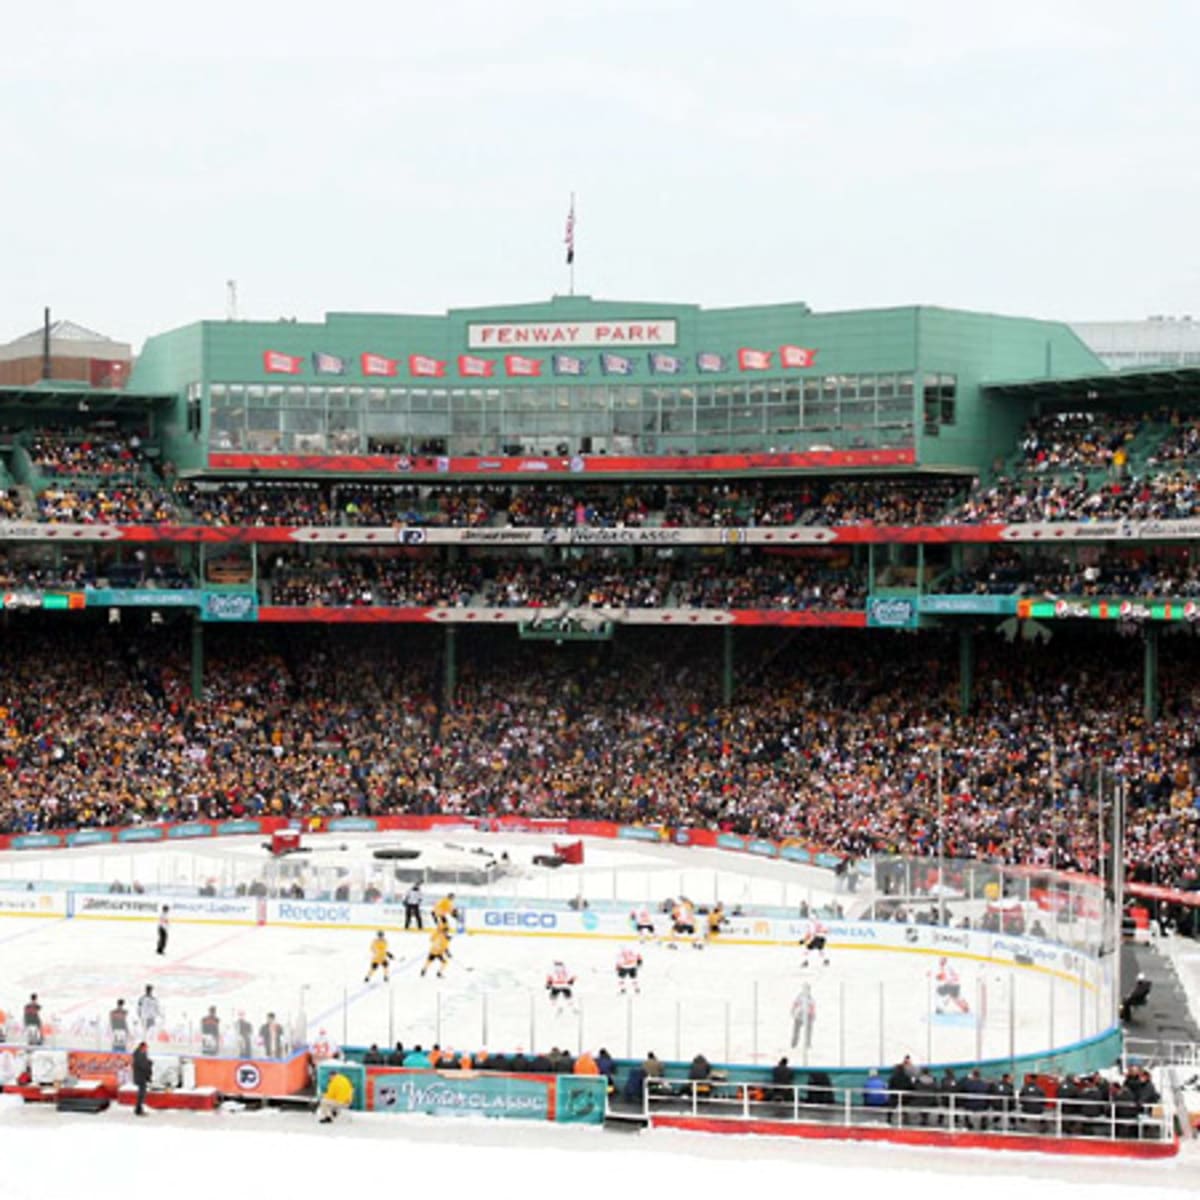 The 2010 NHL Winter Classic - Sports Illustrated